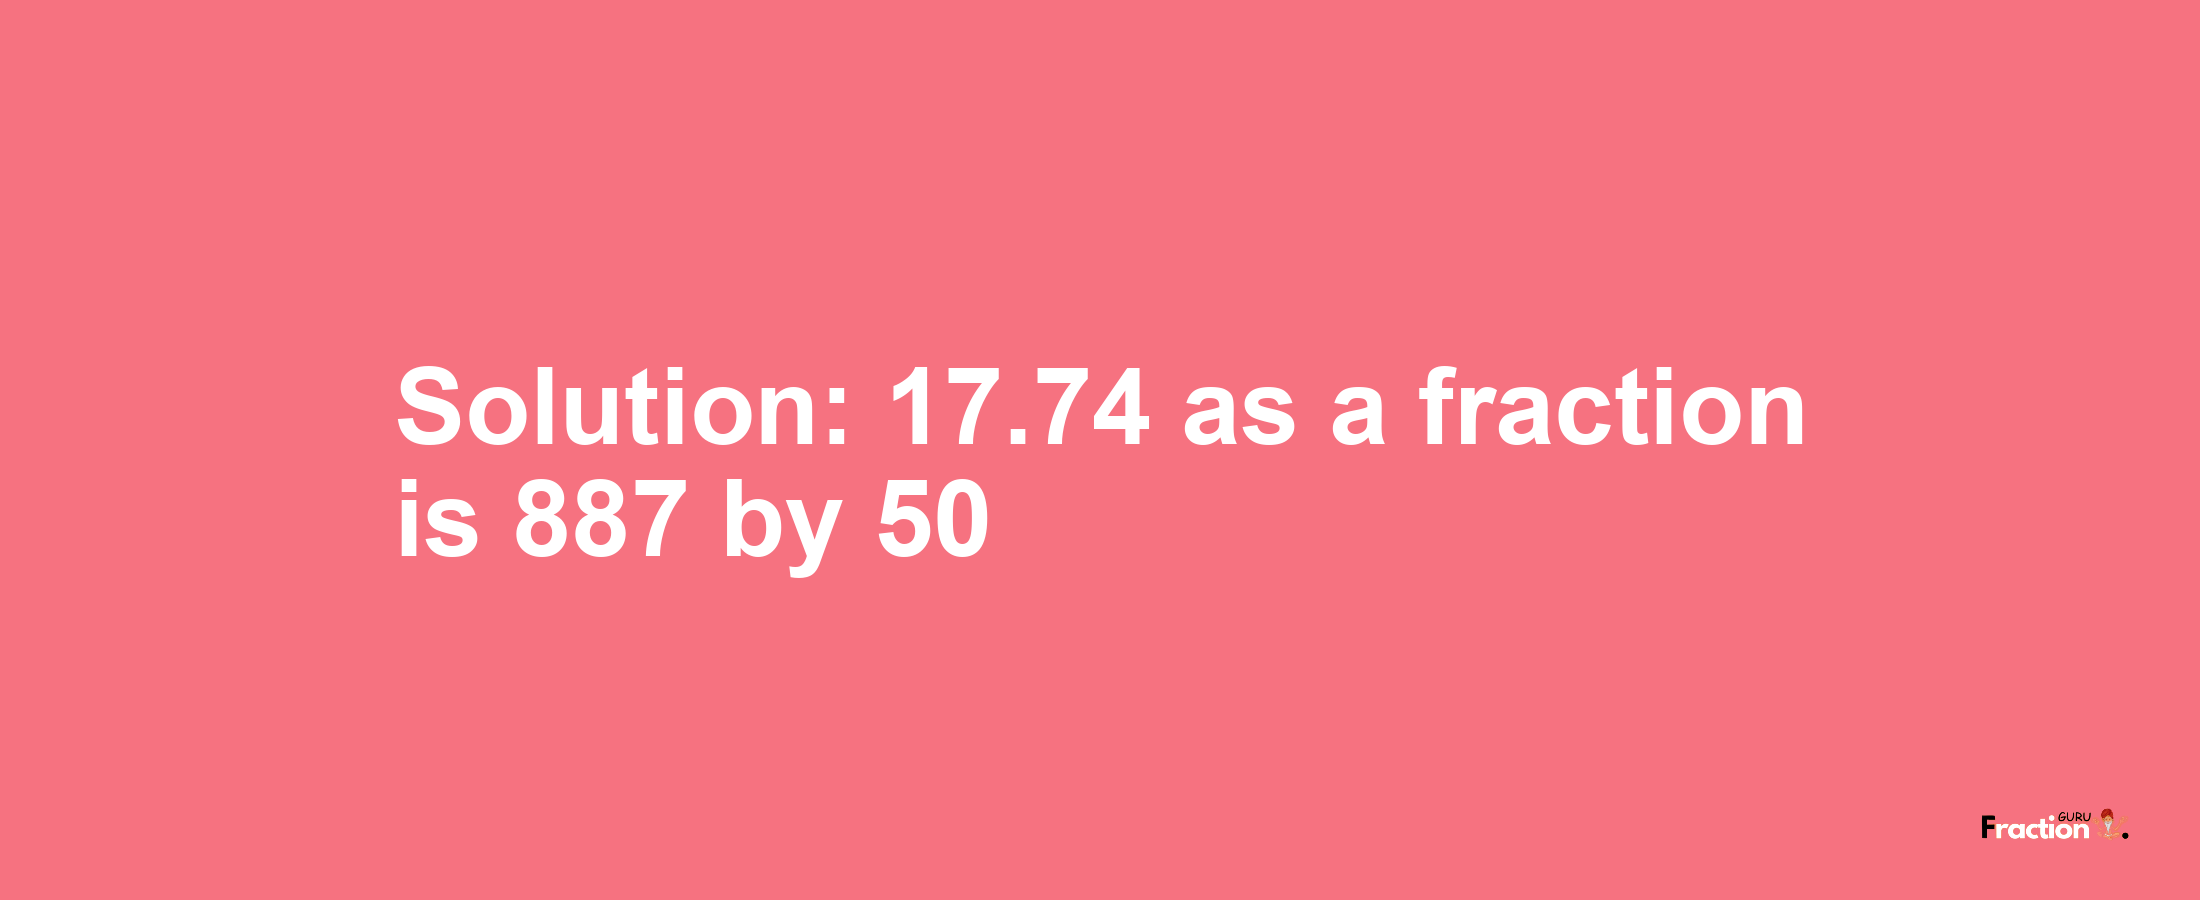 Solution:17.74 as a fraction is 887/50